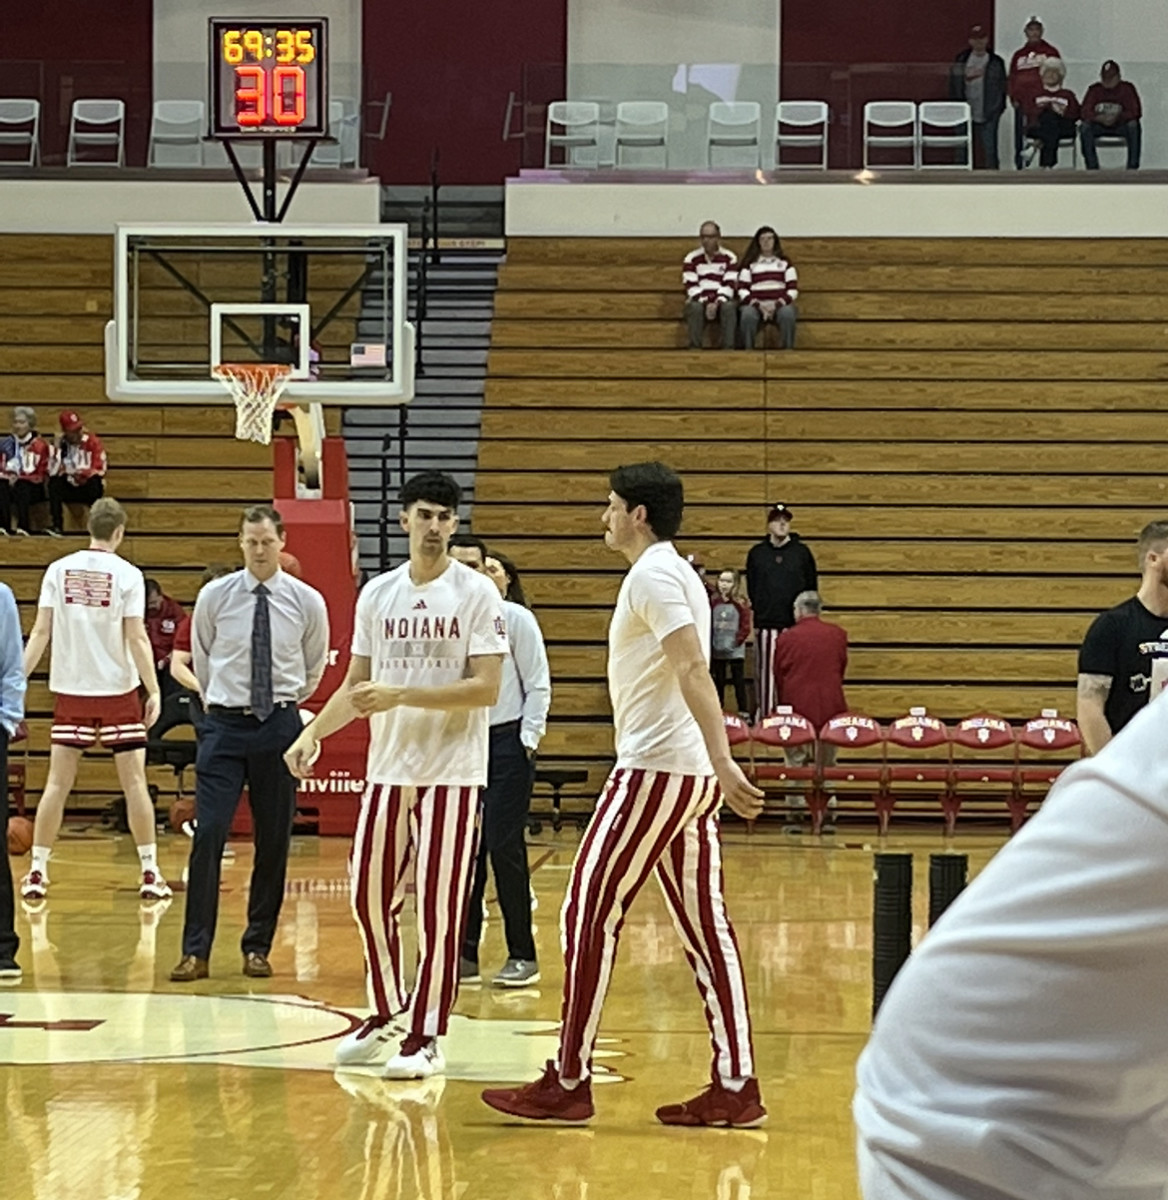 Trey Galloway is in uniform for warmups against Wisconsin.